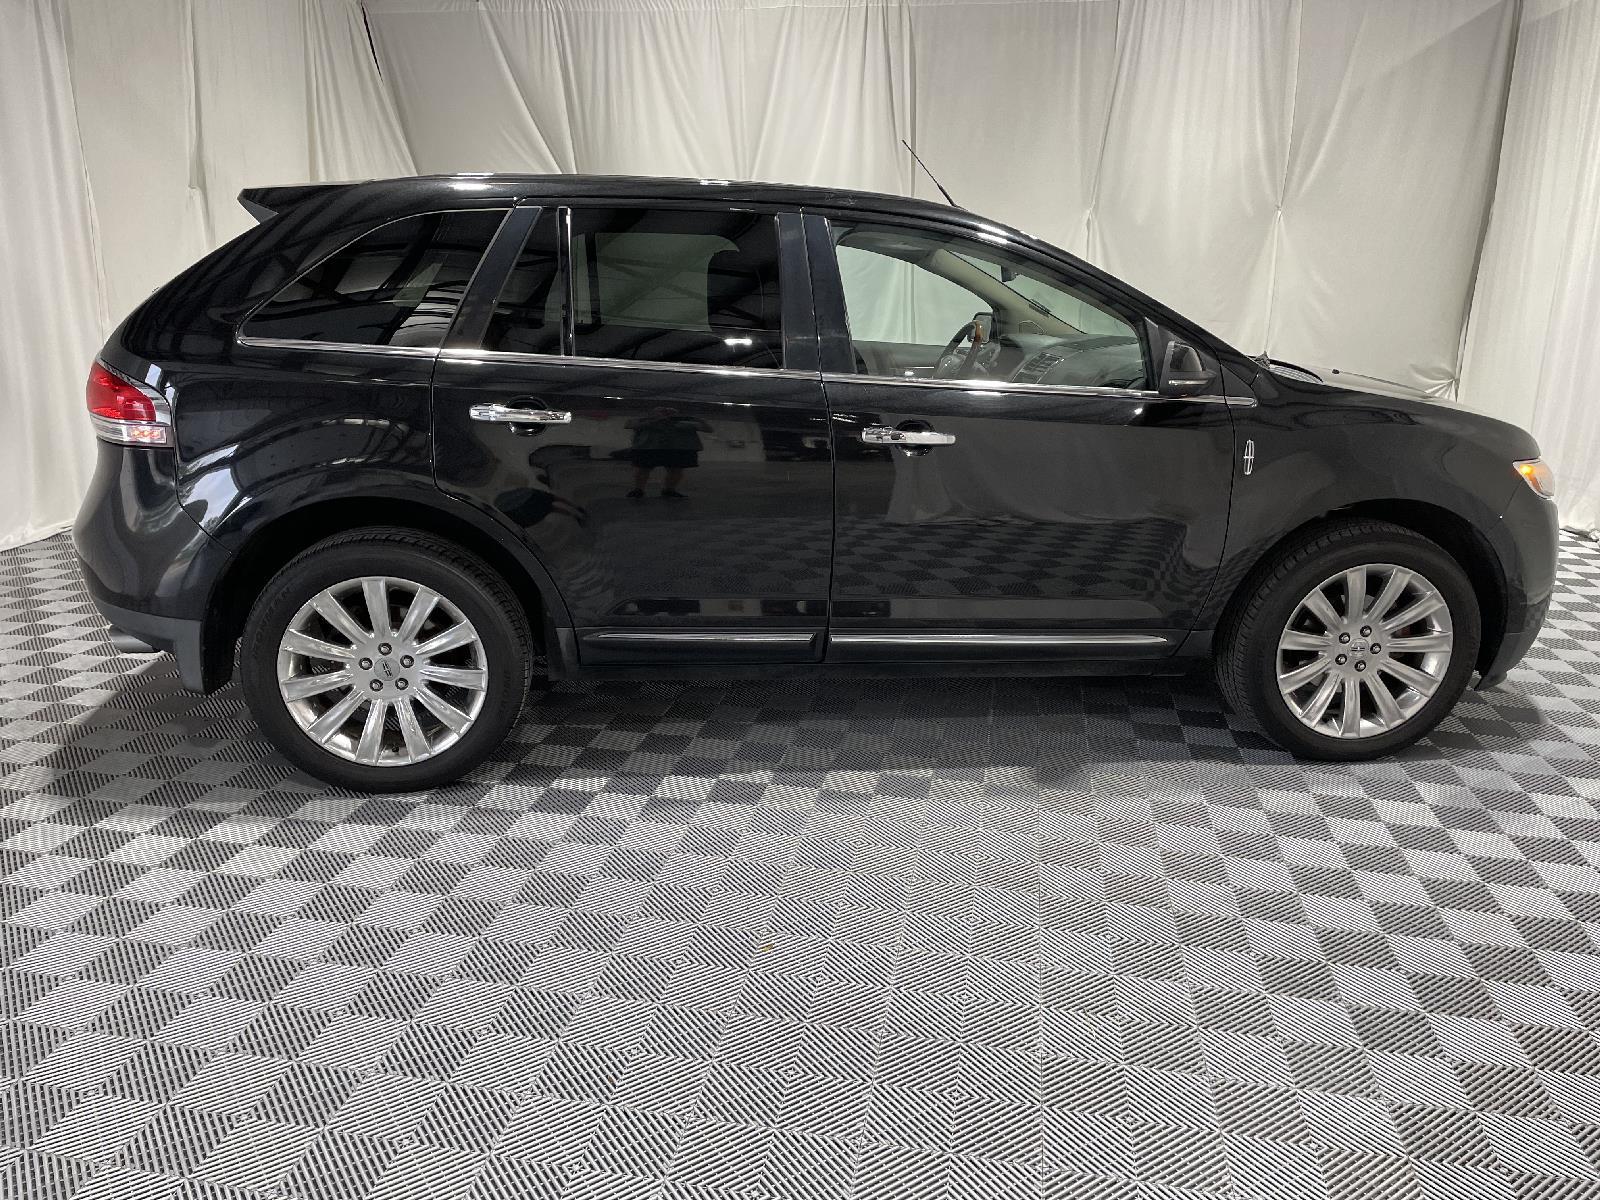 Used 2013 Lincoln MKX  crossover for sale in St Joseph MO